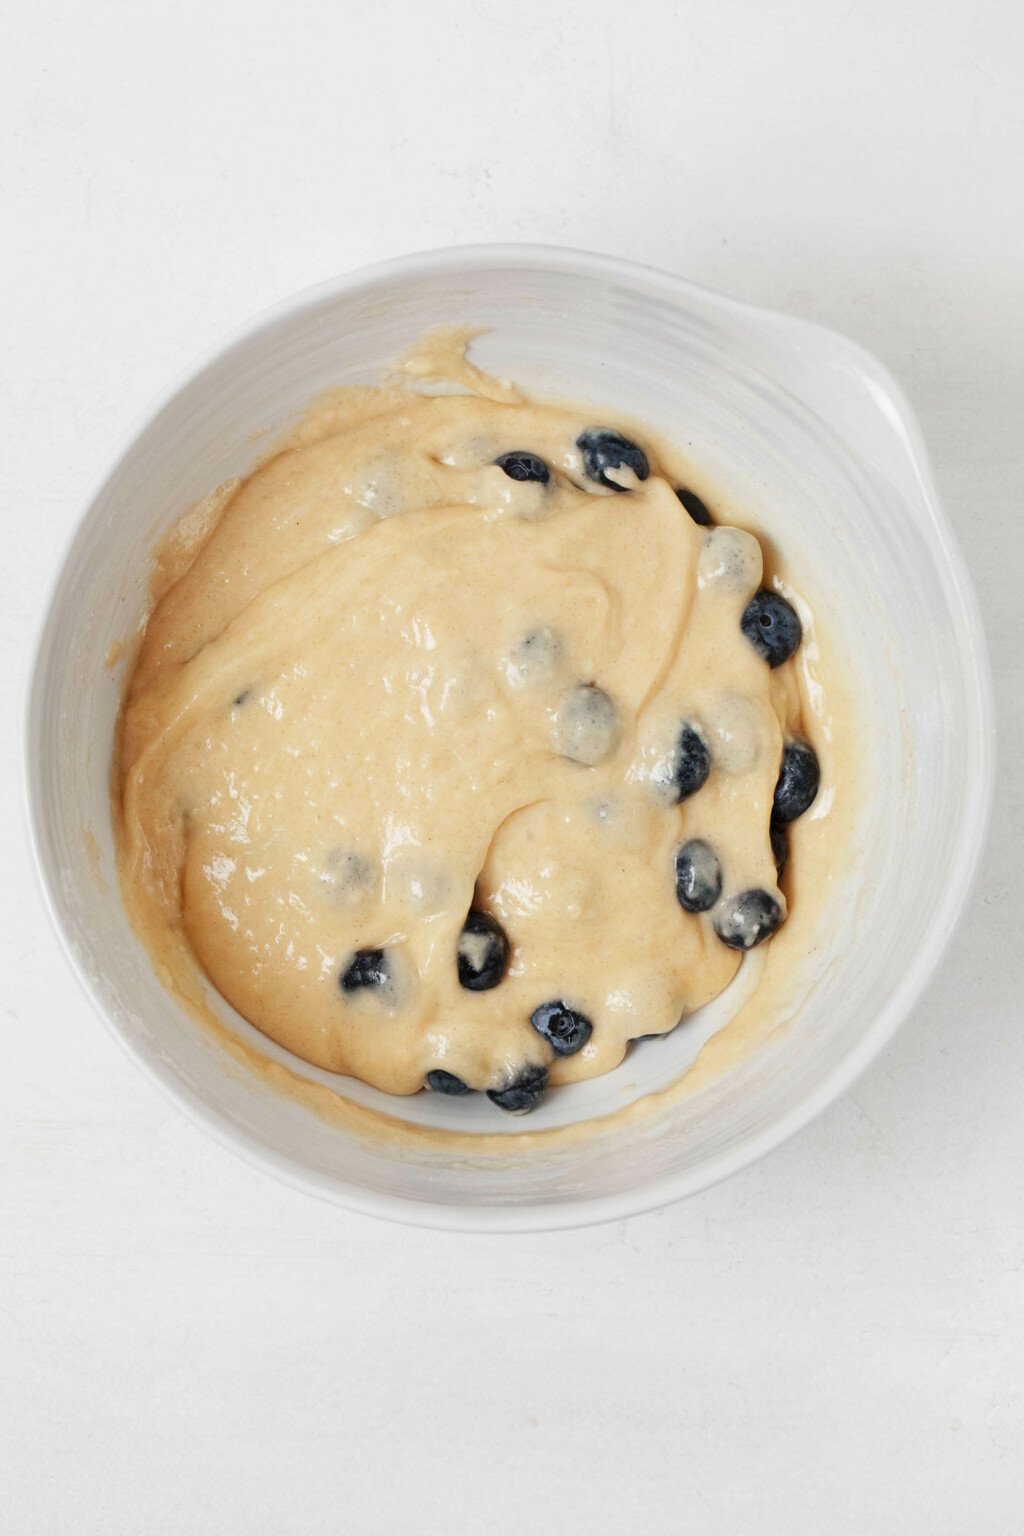 Muffin batter has just had fresh blueberries folded into it, in a white mixing bowl.